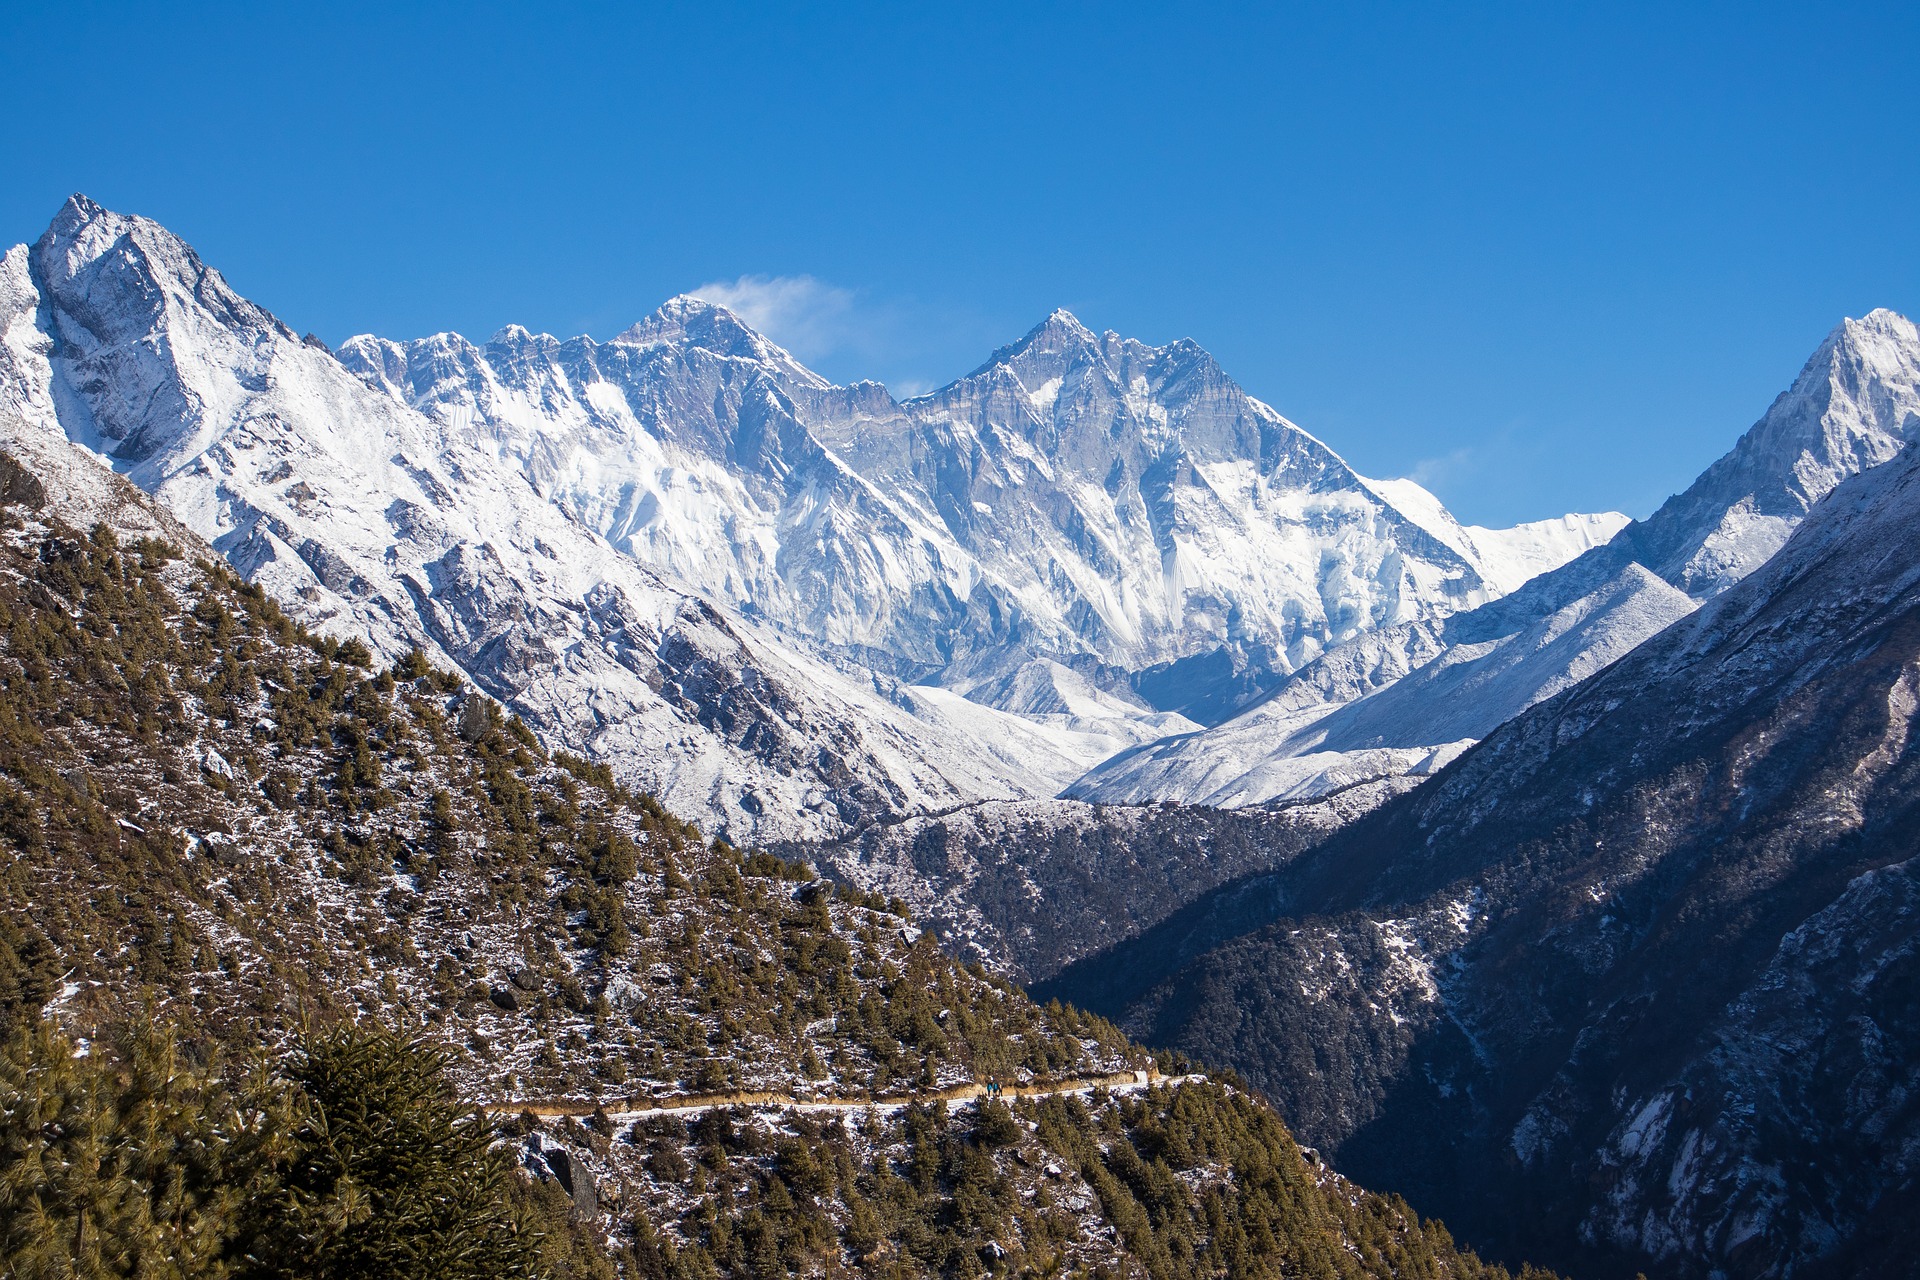 Everest Base Camp Trek Difficulty and Weather